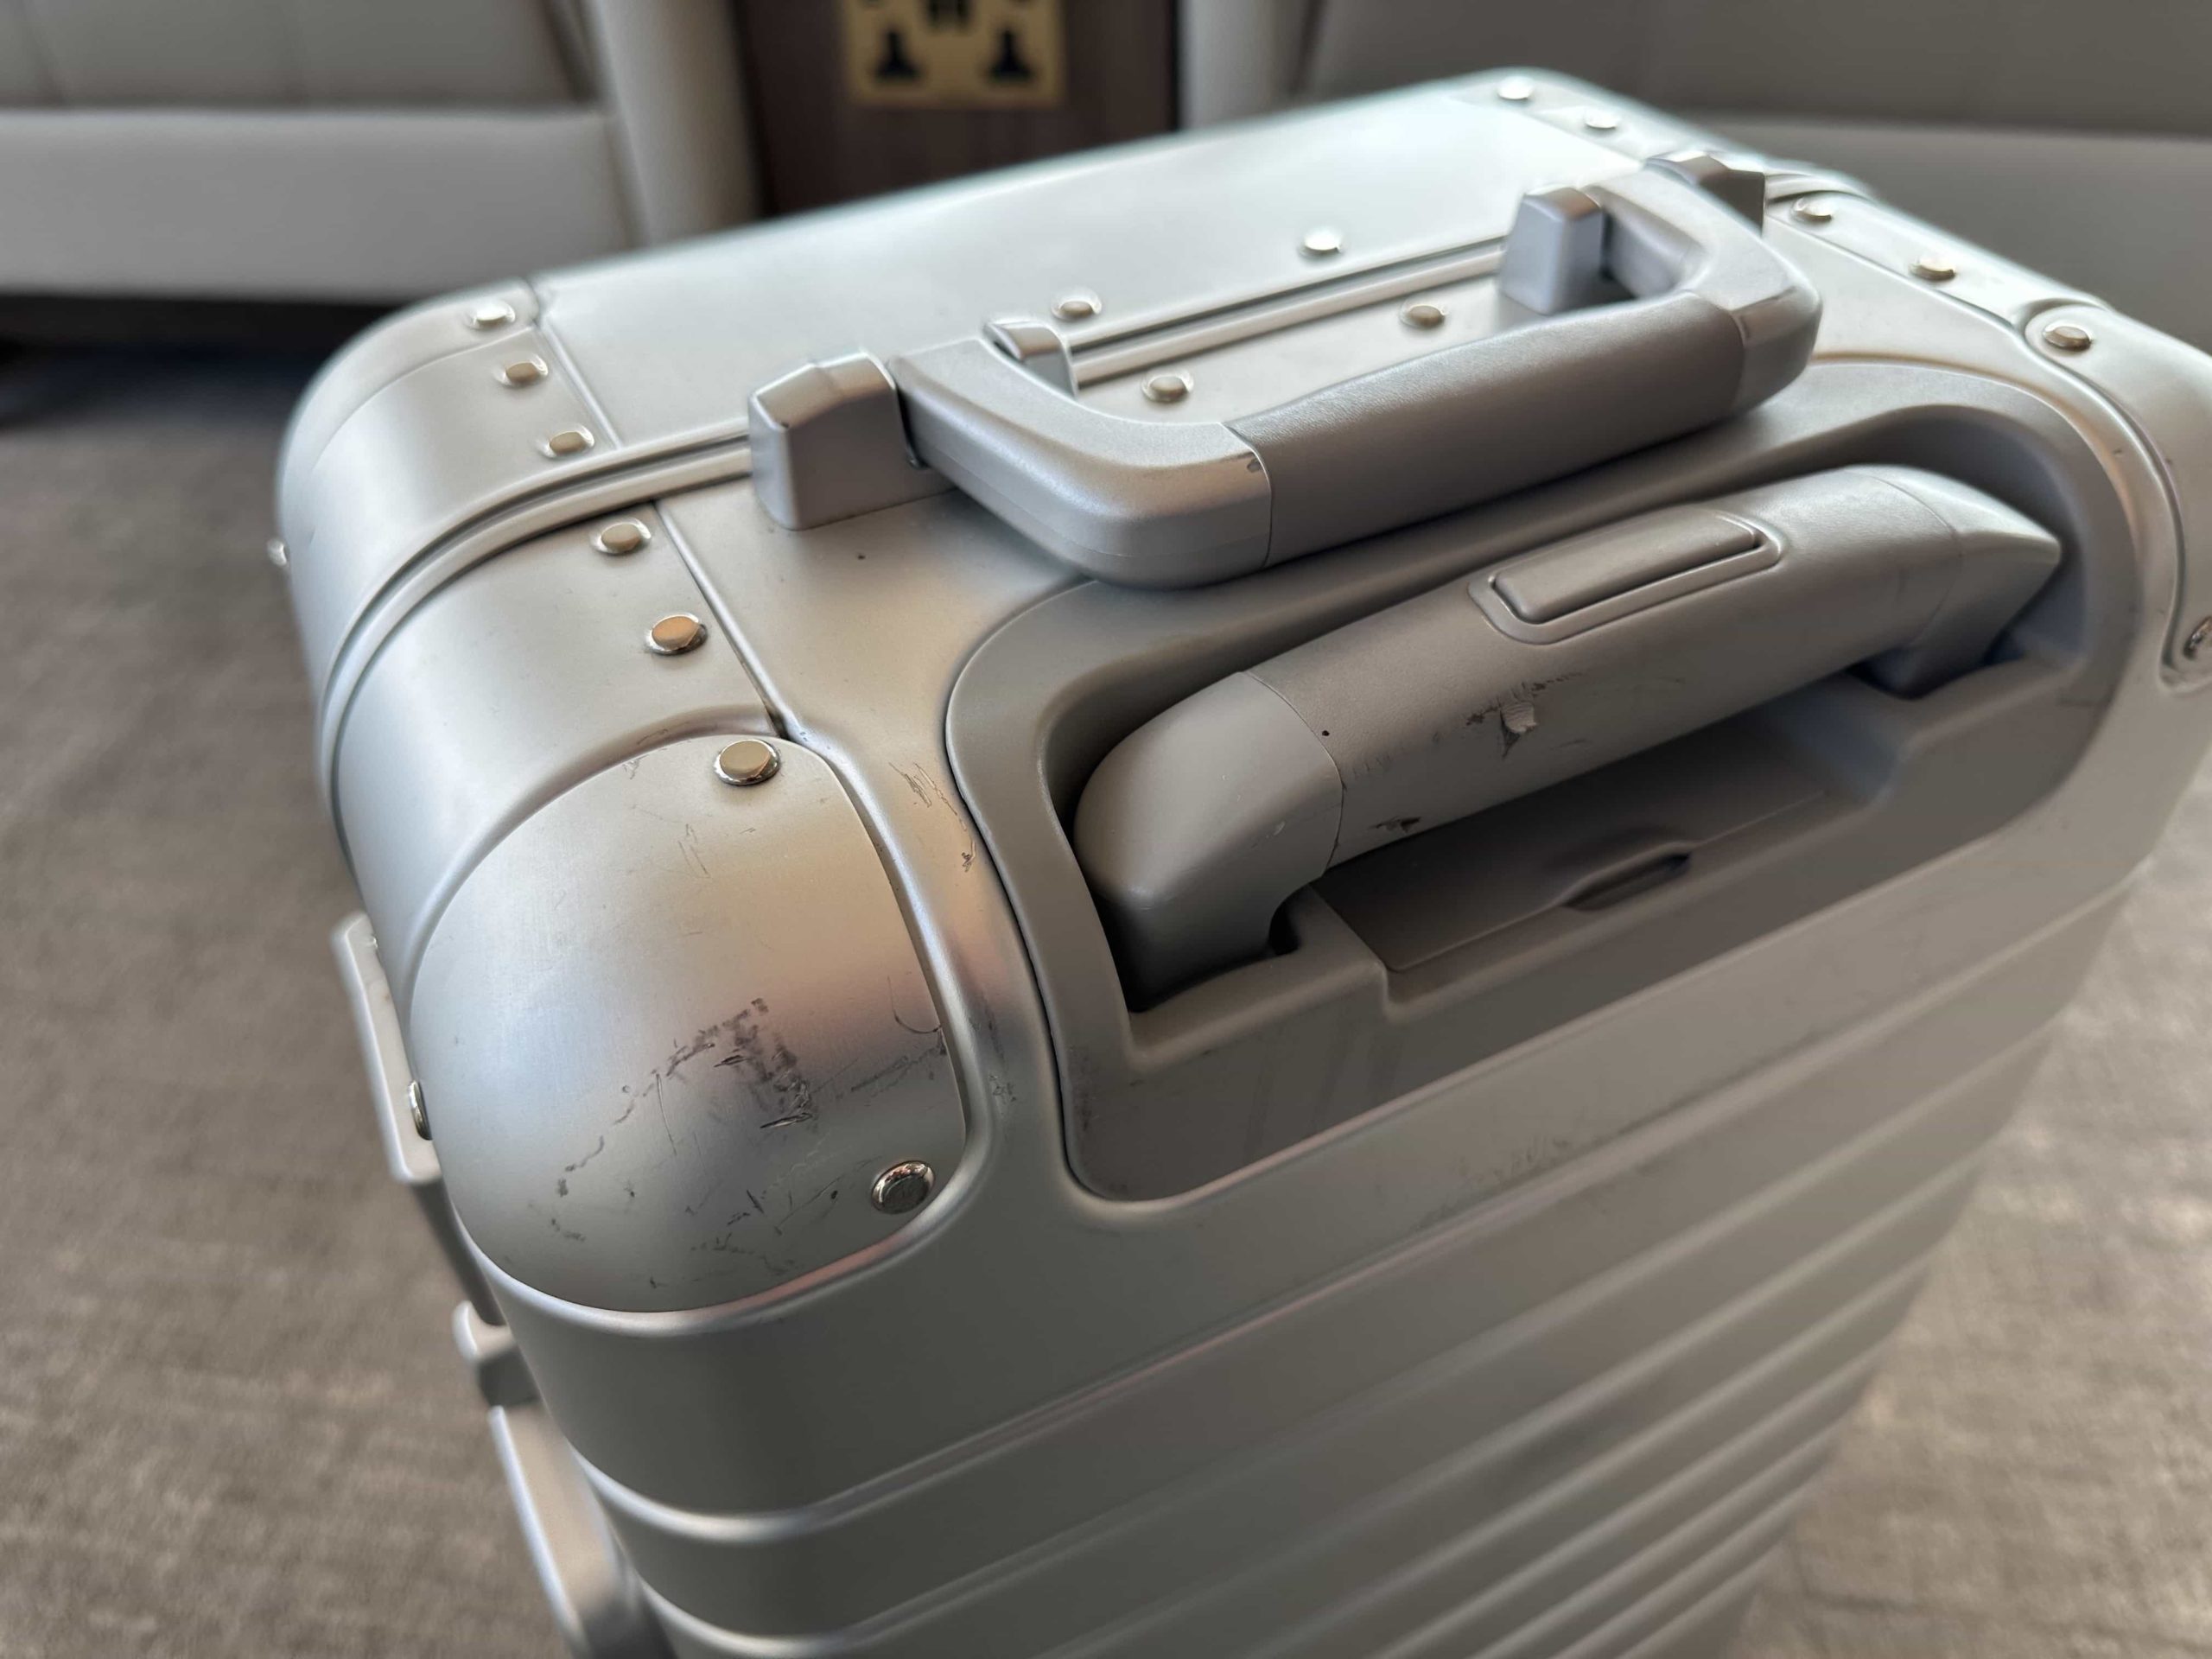 A suitcase positioned to highlight scuffs and scratches on the corners and wear on the handle